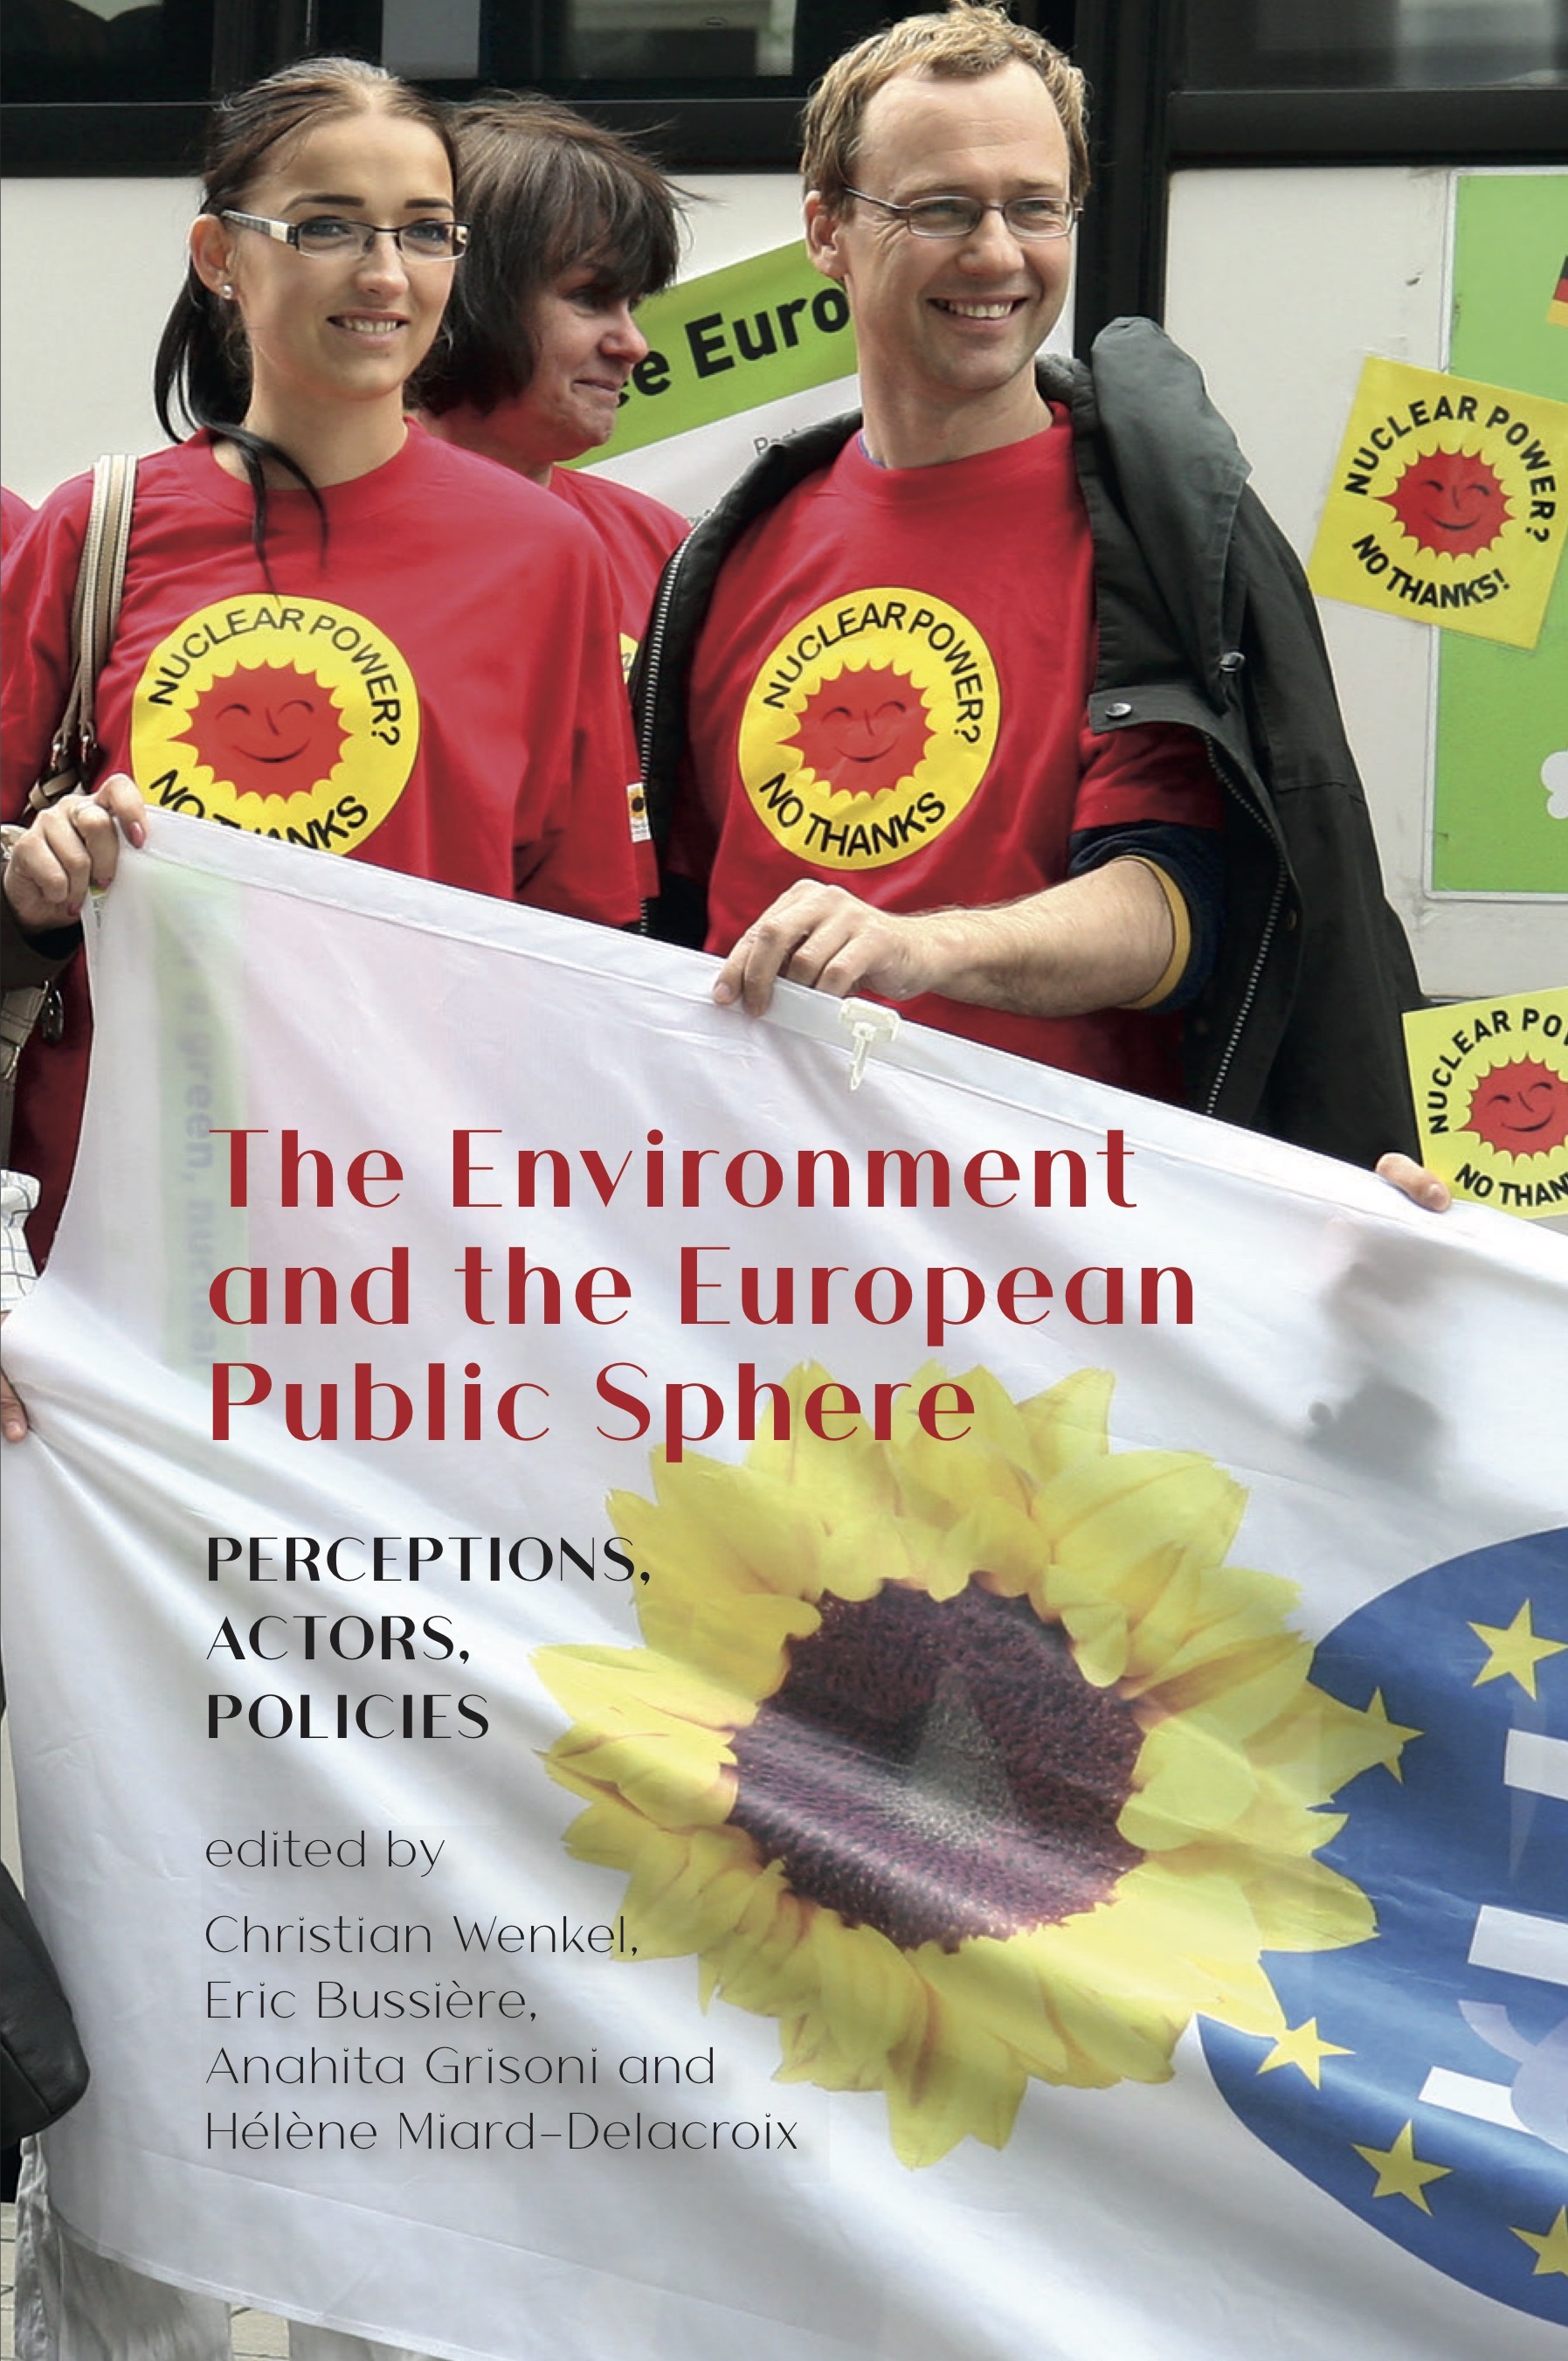 The Environment and the European Public Sphere: Perceptions, Actions, Policies (The White Horse Press, 2020)